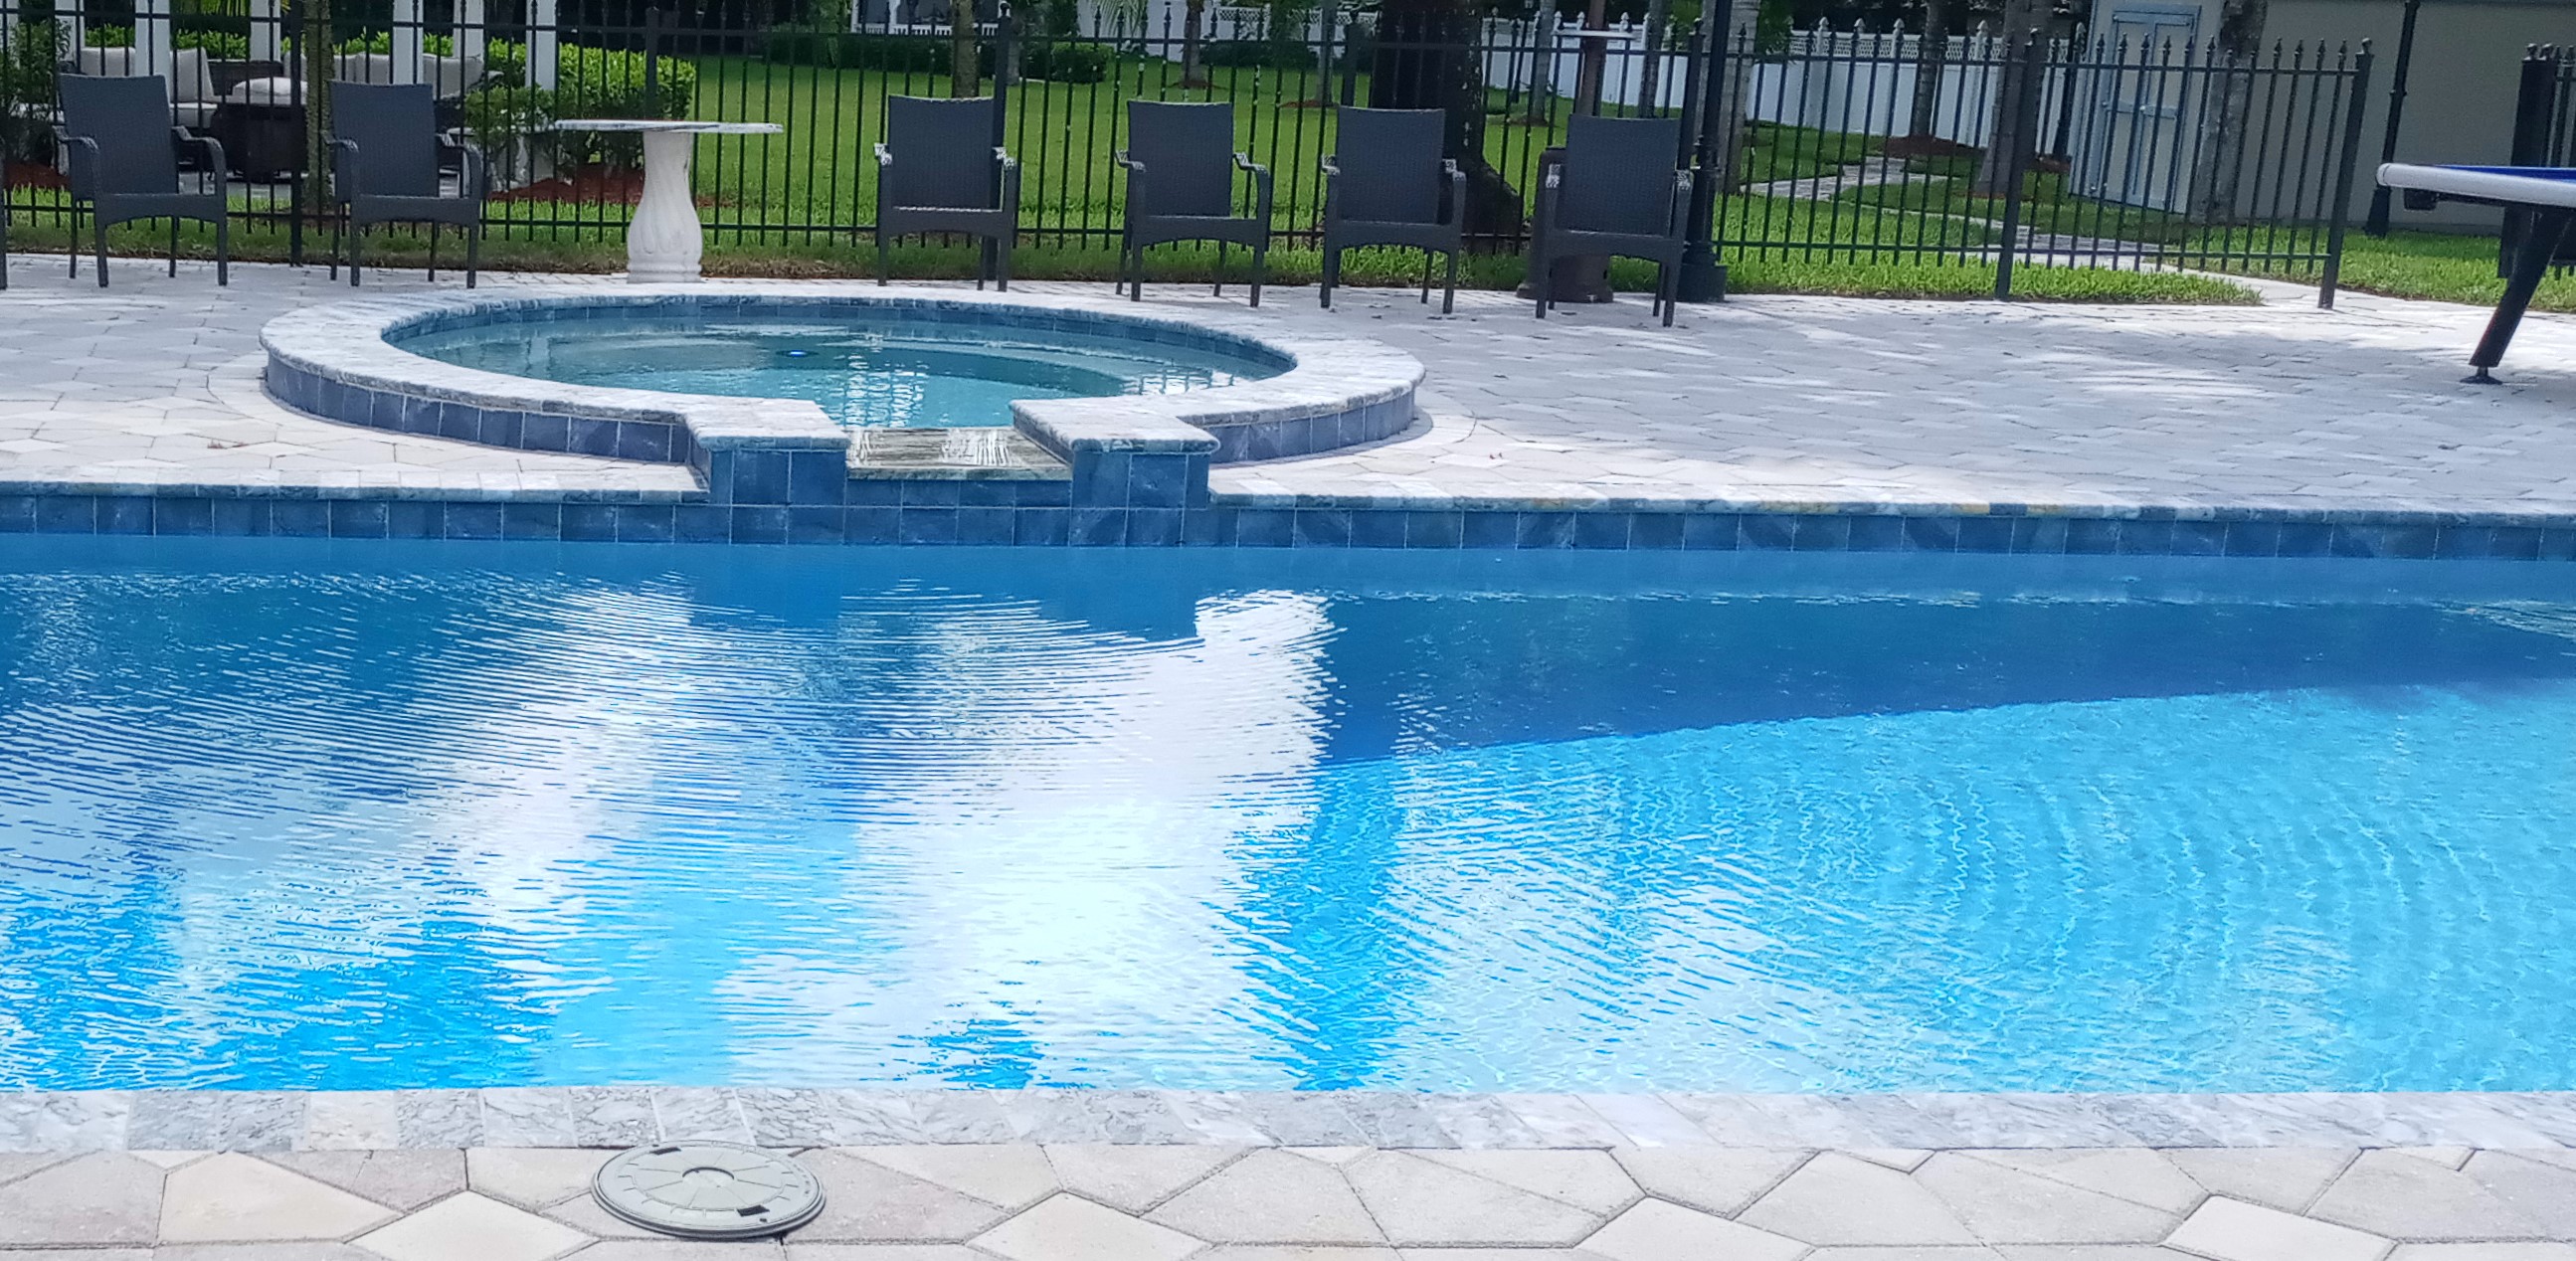 Pool inspection